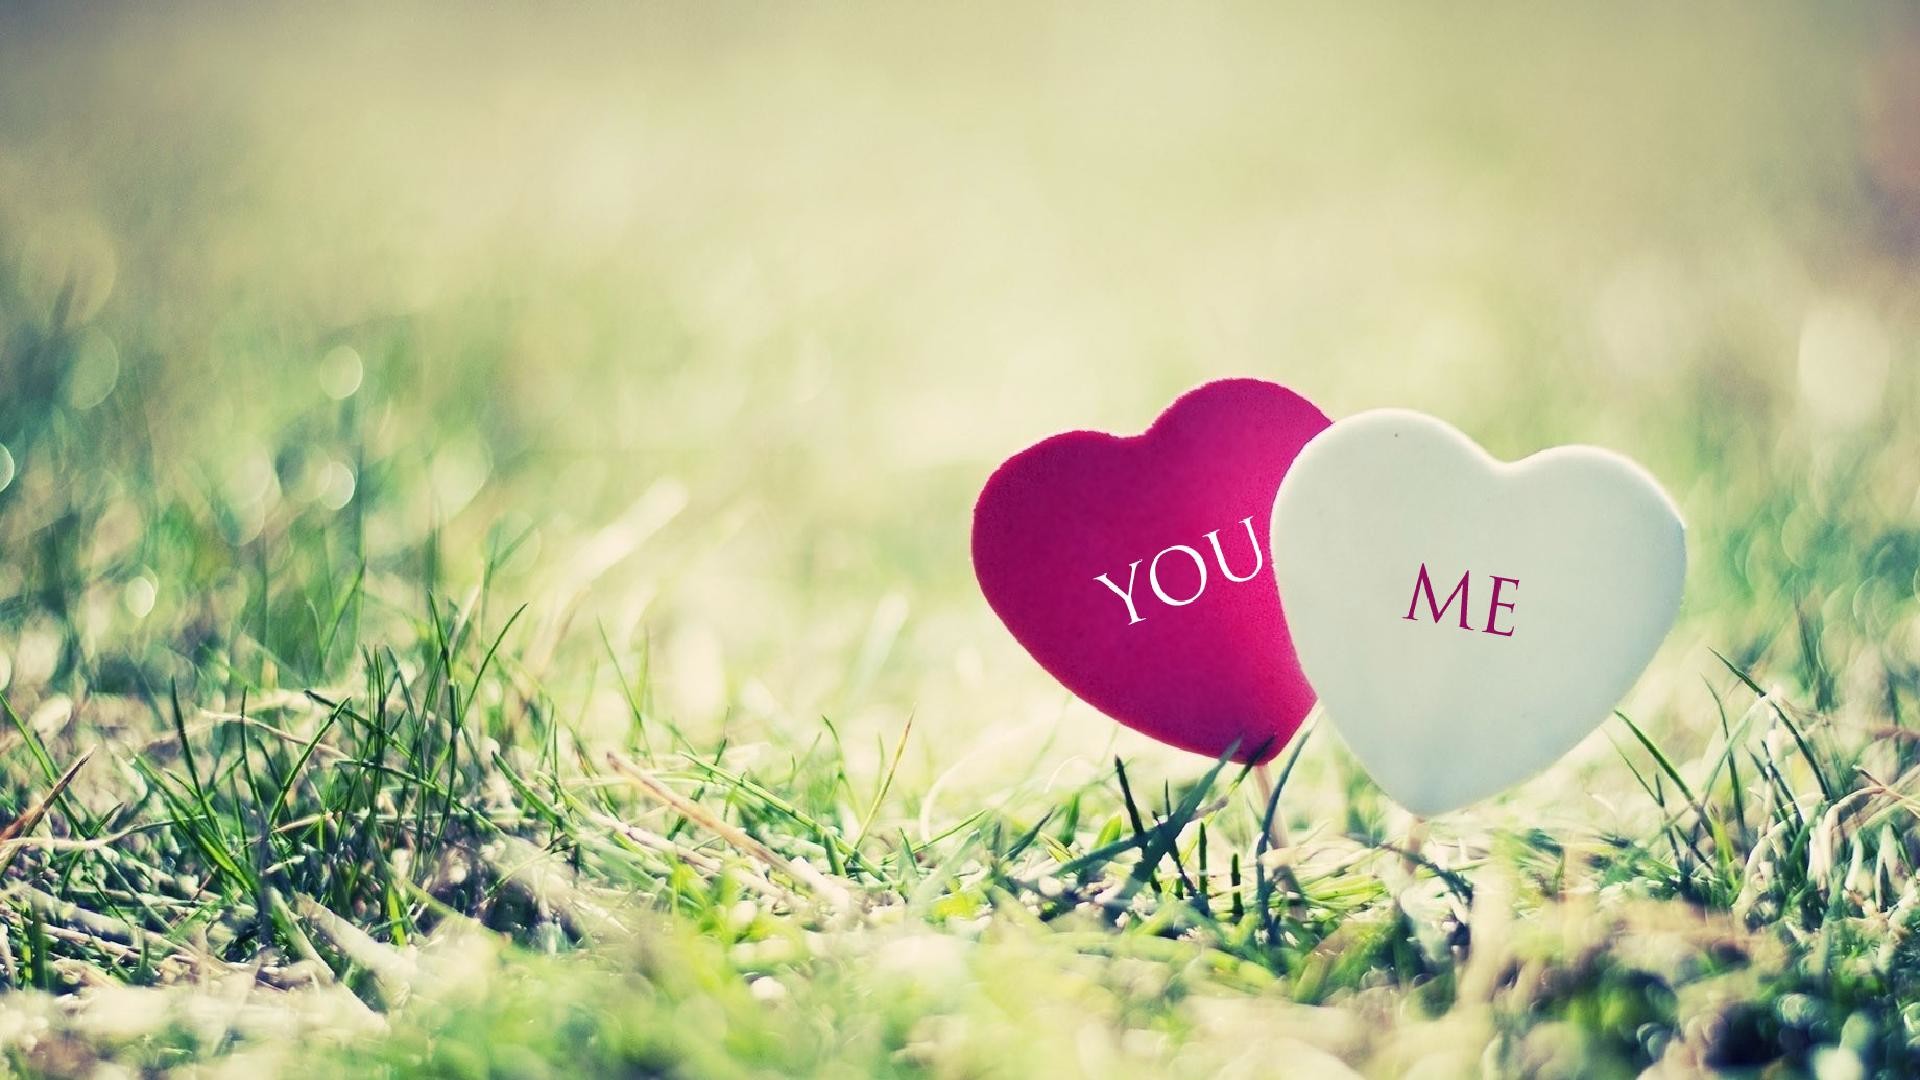 1920x1080 You and me cute hearts